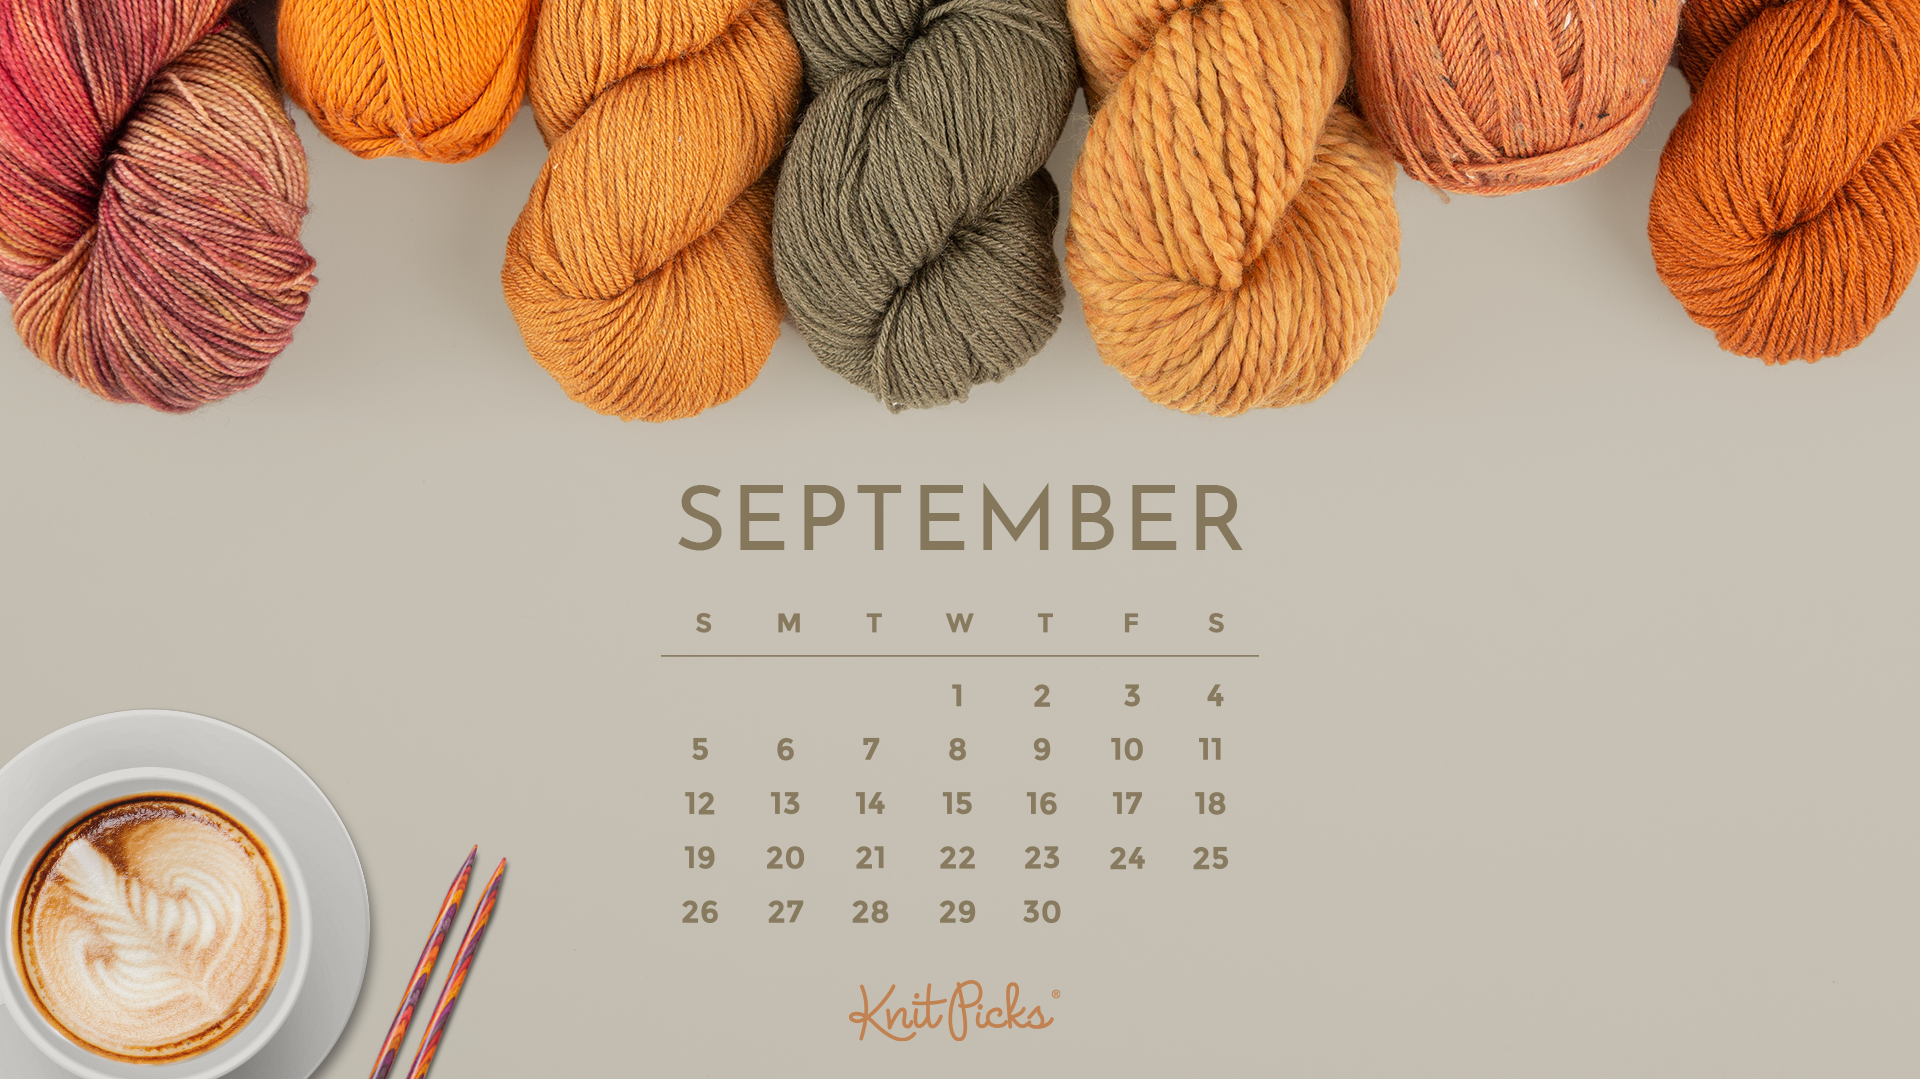 Introducing the Free Downloadable September 2021 Calendar, which is guaranteed to become your new favorite tool! It is designed to help you stay organized and plan your month seamlessly. Get it now and experience its user-friendly features yourself.